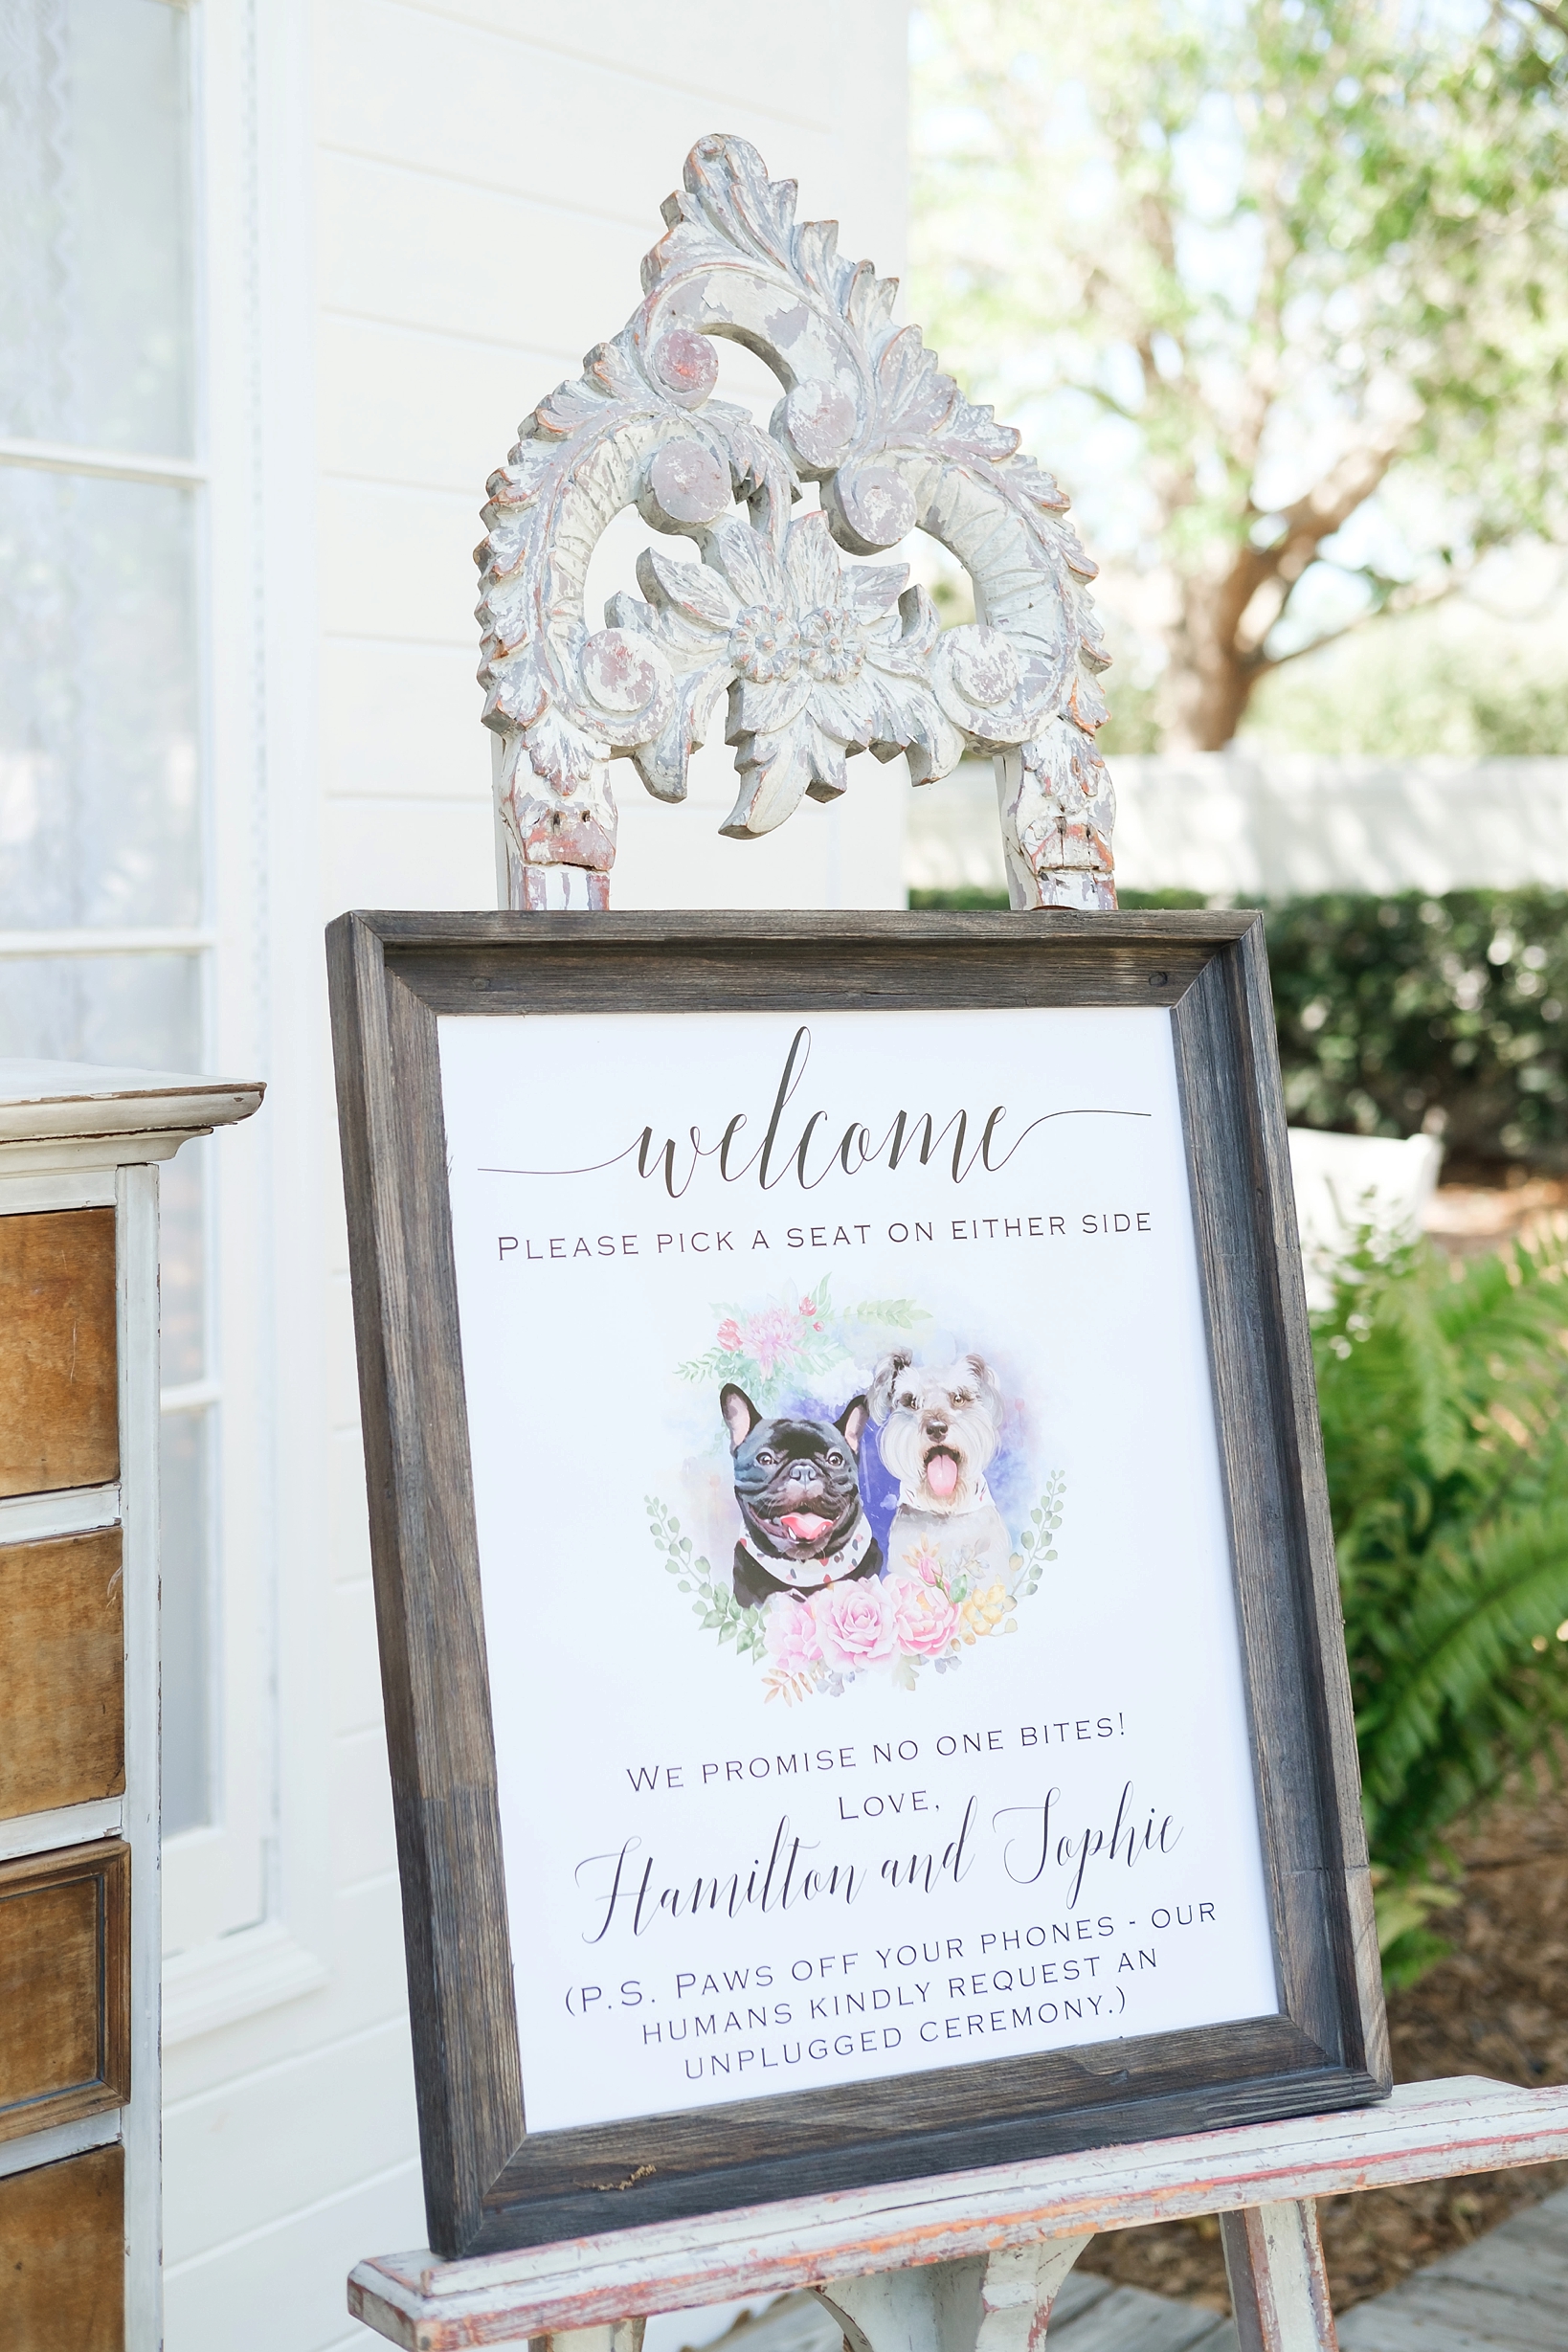 Welcome sign custom made from watercolor paint of the Bride and Groom's dogs